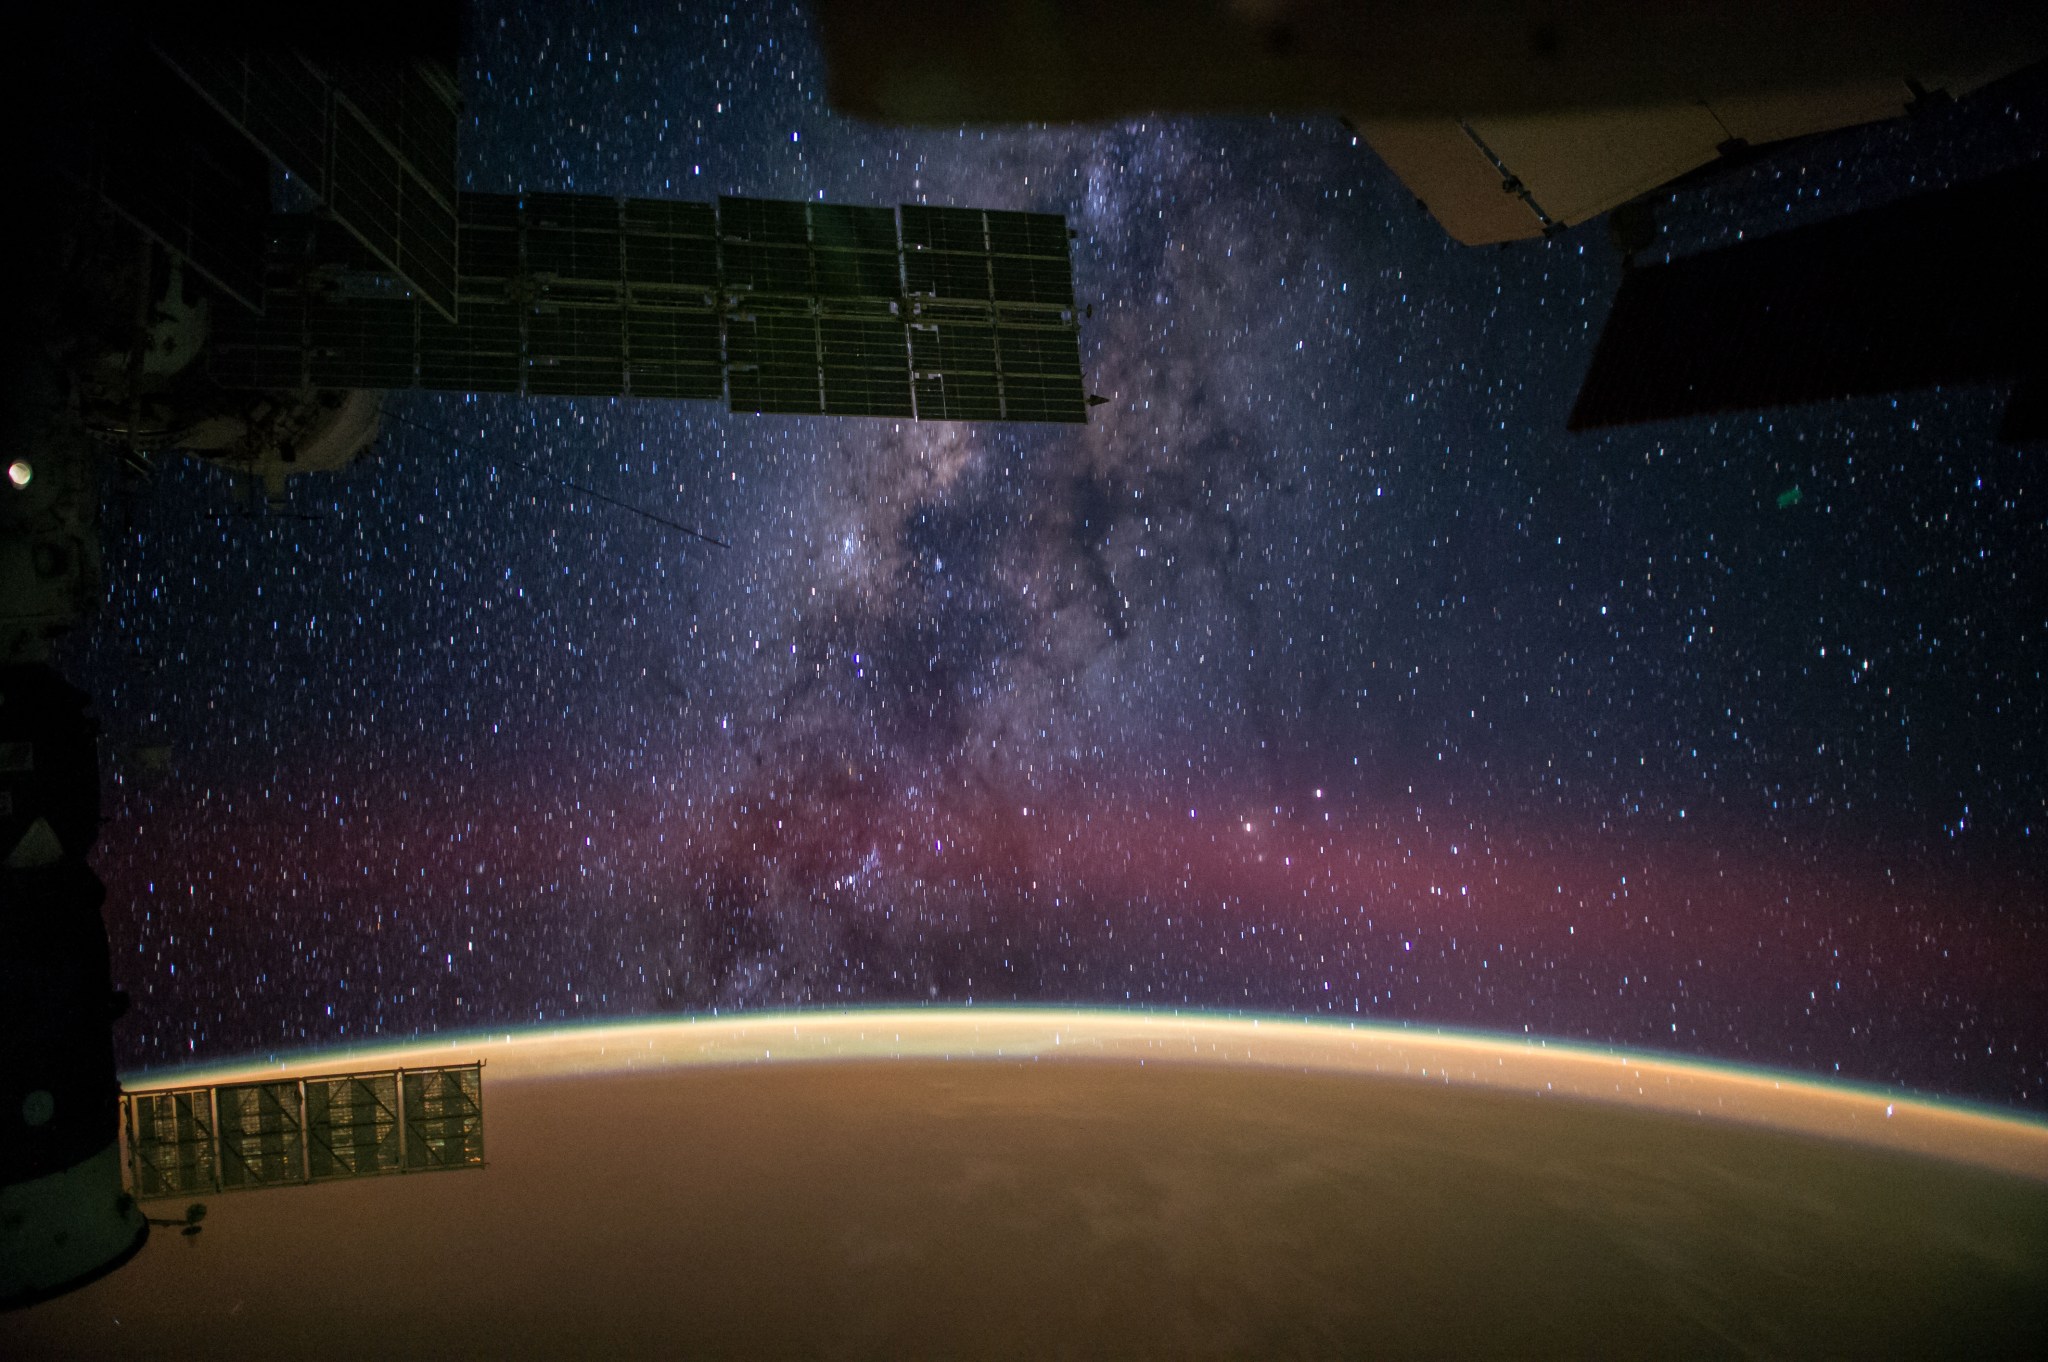 A panorama of the night sky and the Milky Way. There is a portion of the Earth visible showing the Sahara Desert golden sand with the purple and black image of space with thousands of white stars.